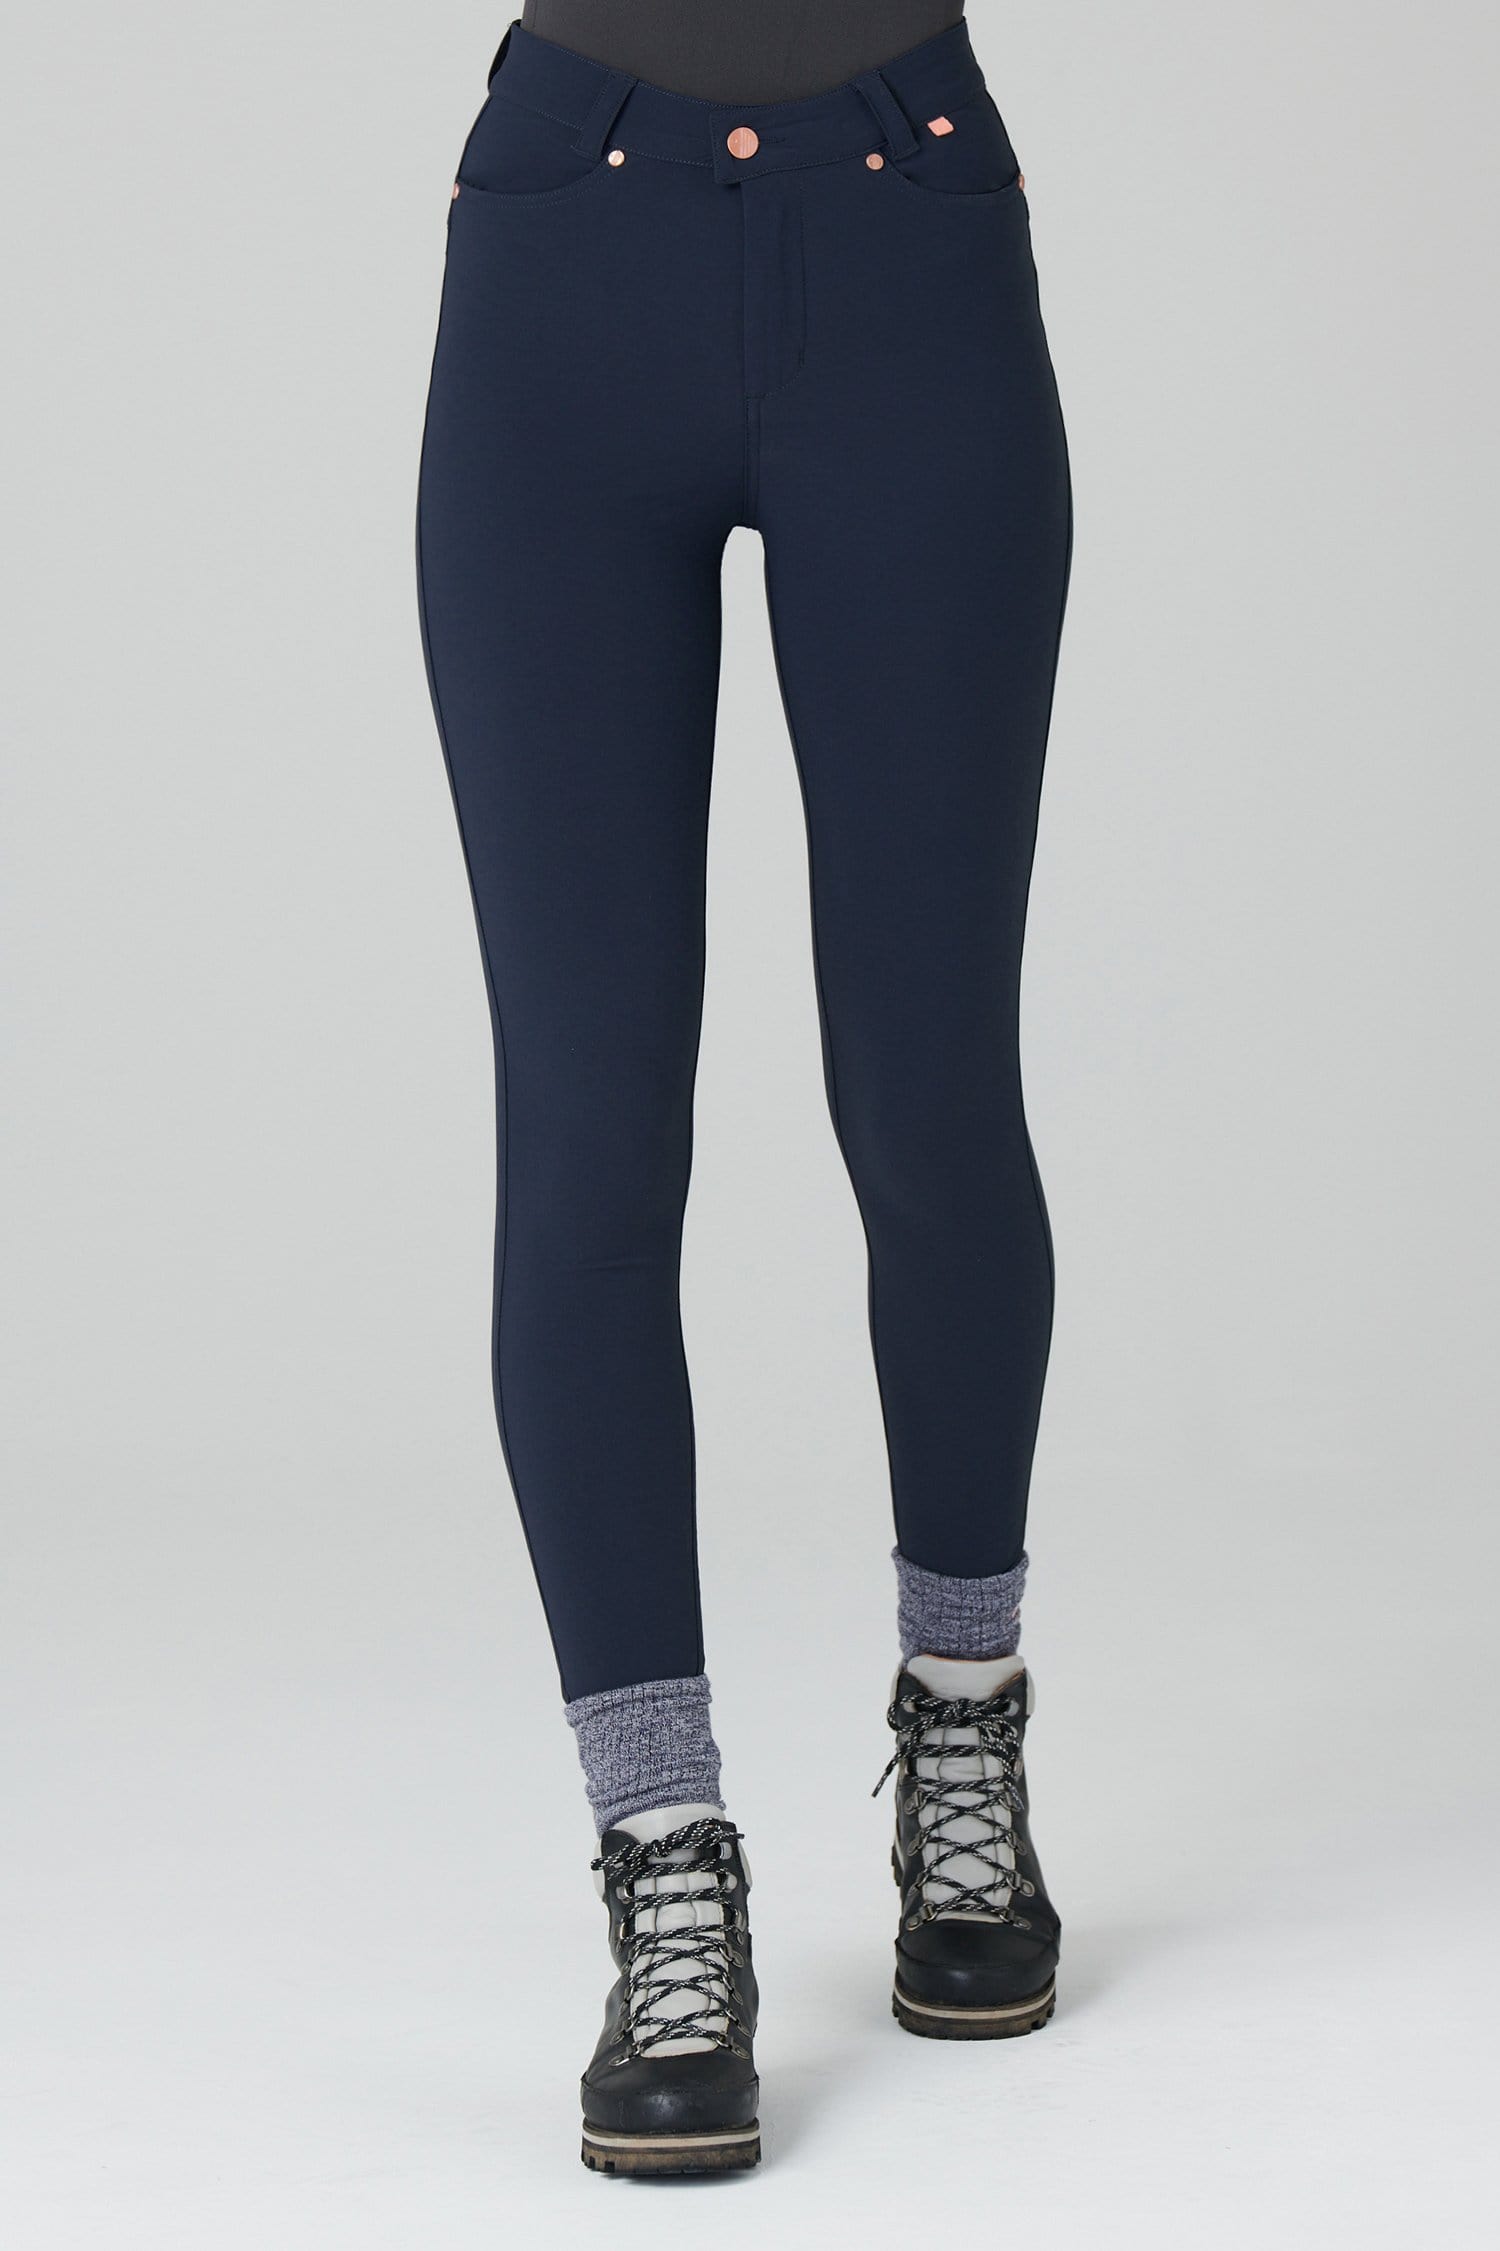 Thermal Skinny Outdoor Trousers - Deep Navy - 36r / Uk18 - Womens - Acai Outdoorwear